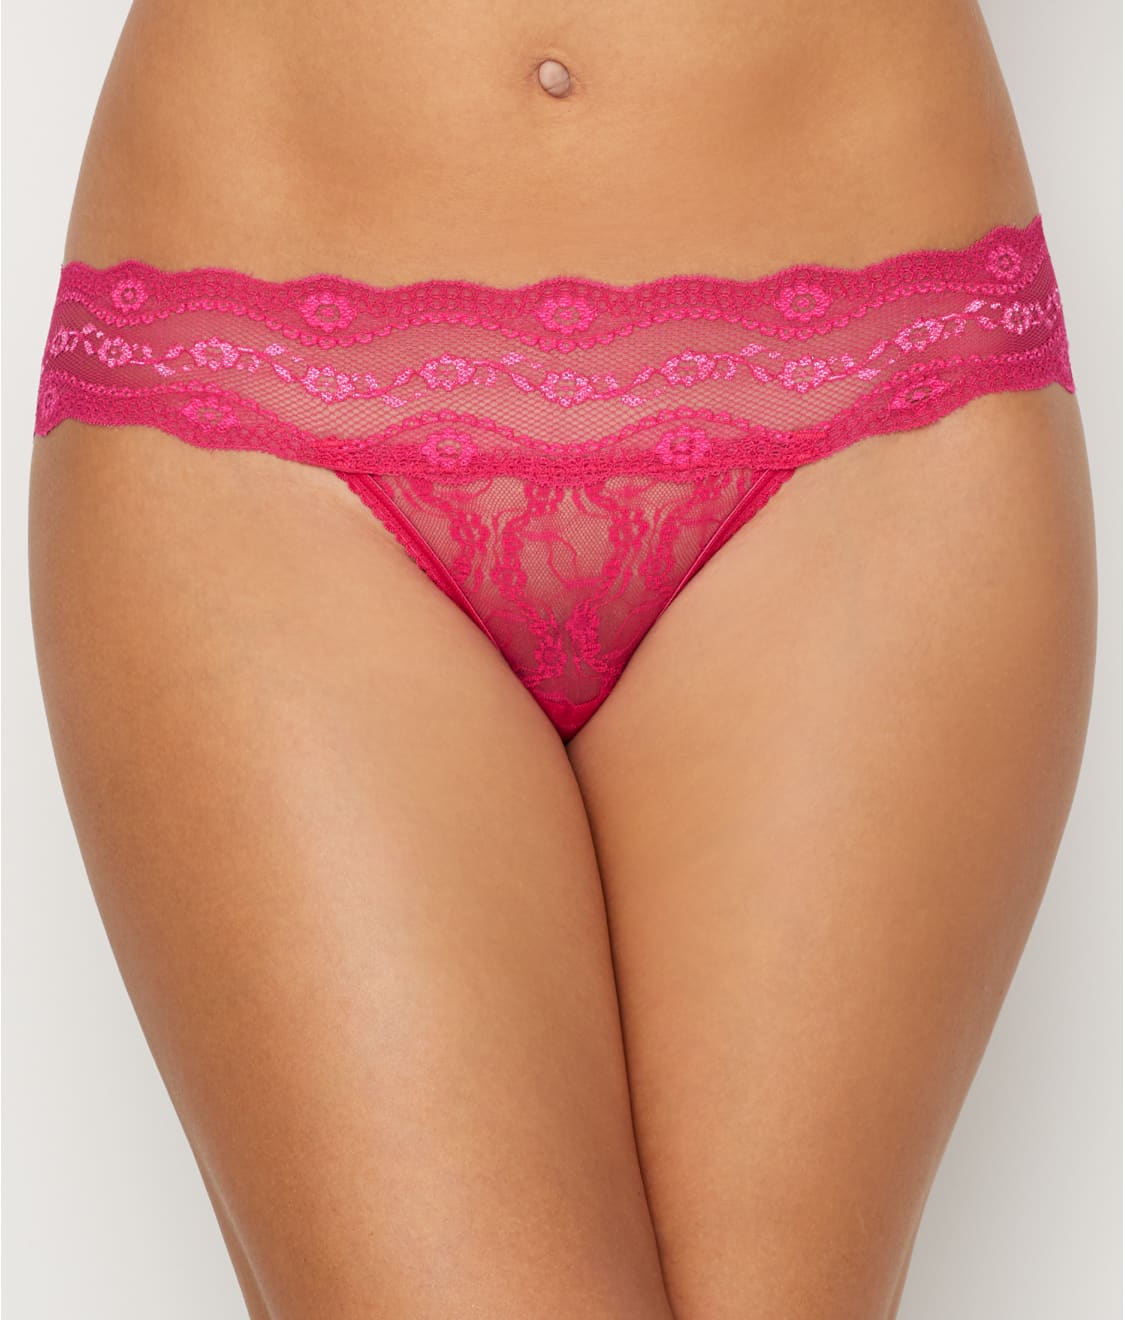 NWT b.tempt'd by Wacoal Stretch Lace Tanga Panties 970142 color 670 pink M L 